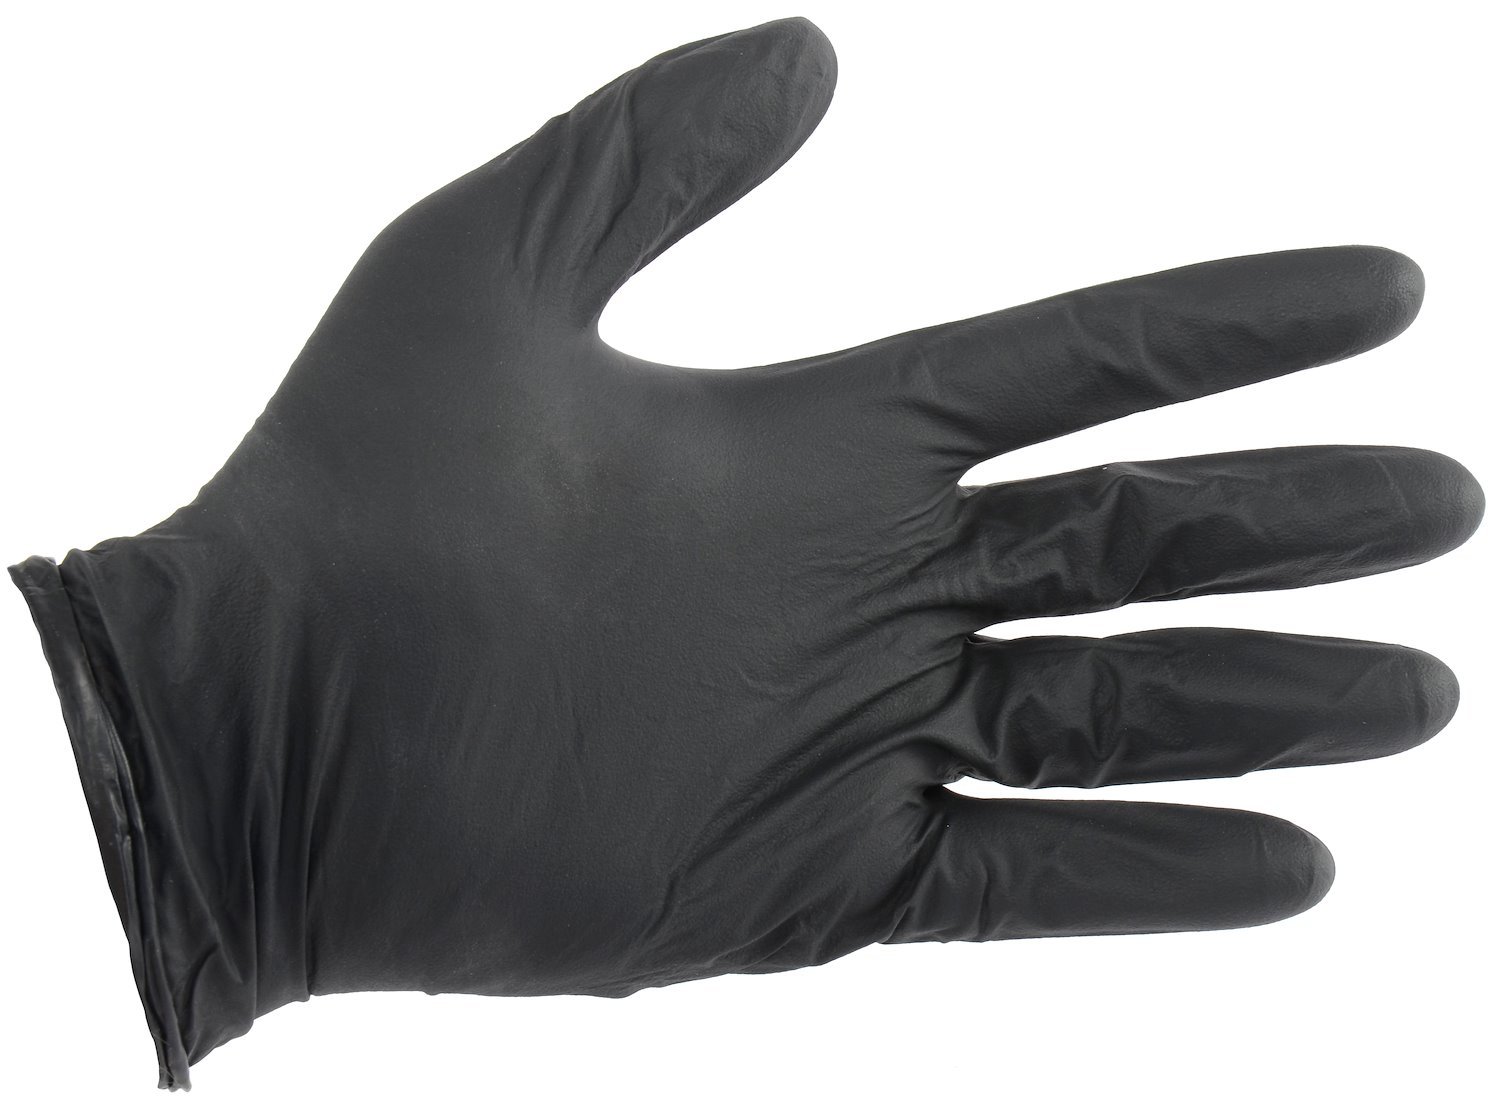 Industrial Nitrile Gloves [5.5 mils Thick, Large]